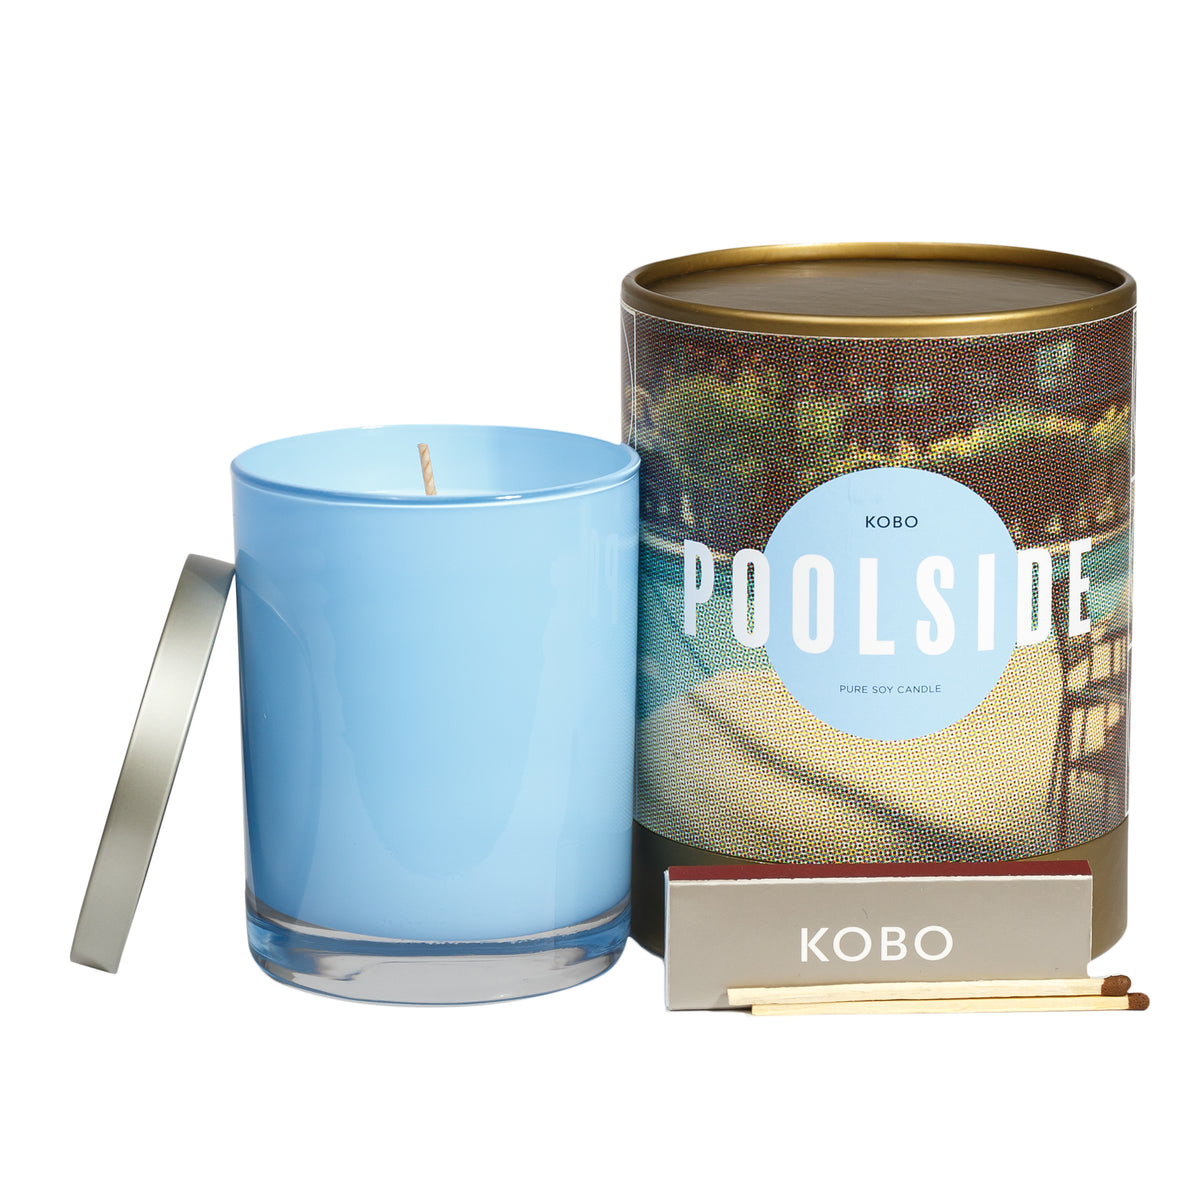 Primary Image of Poolside Road Trip Candle